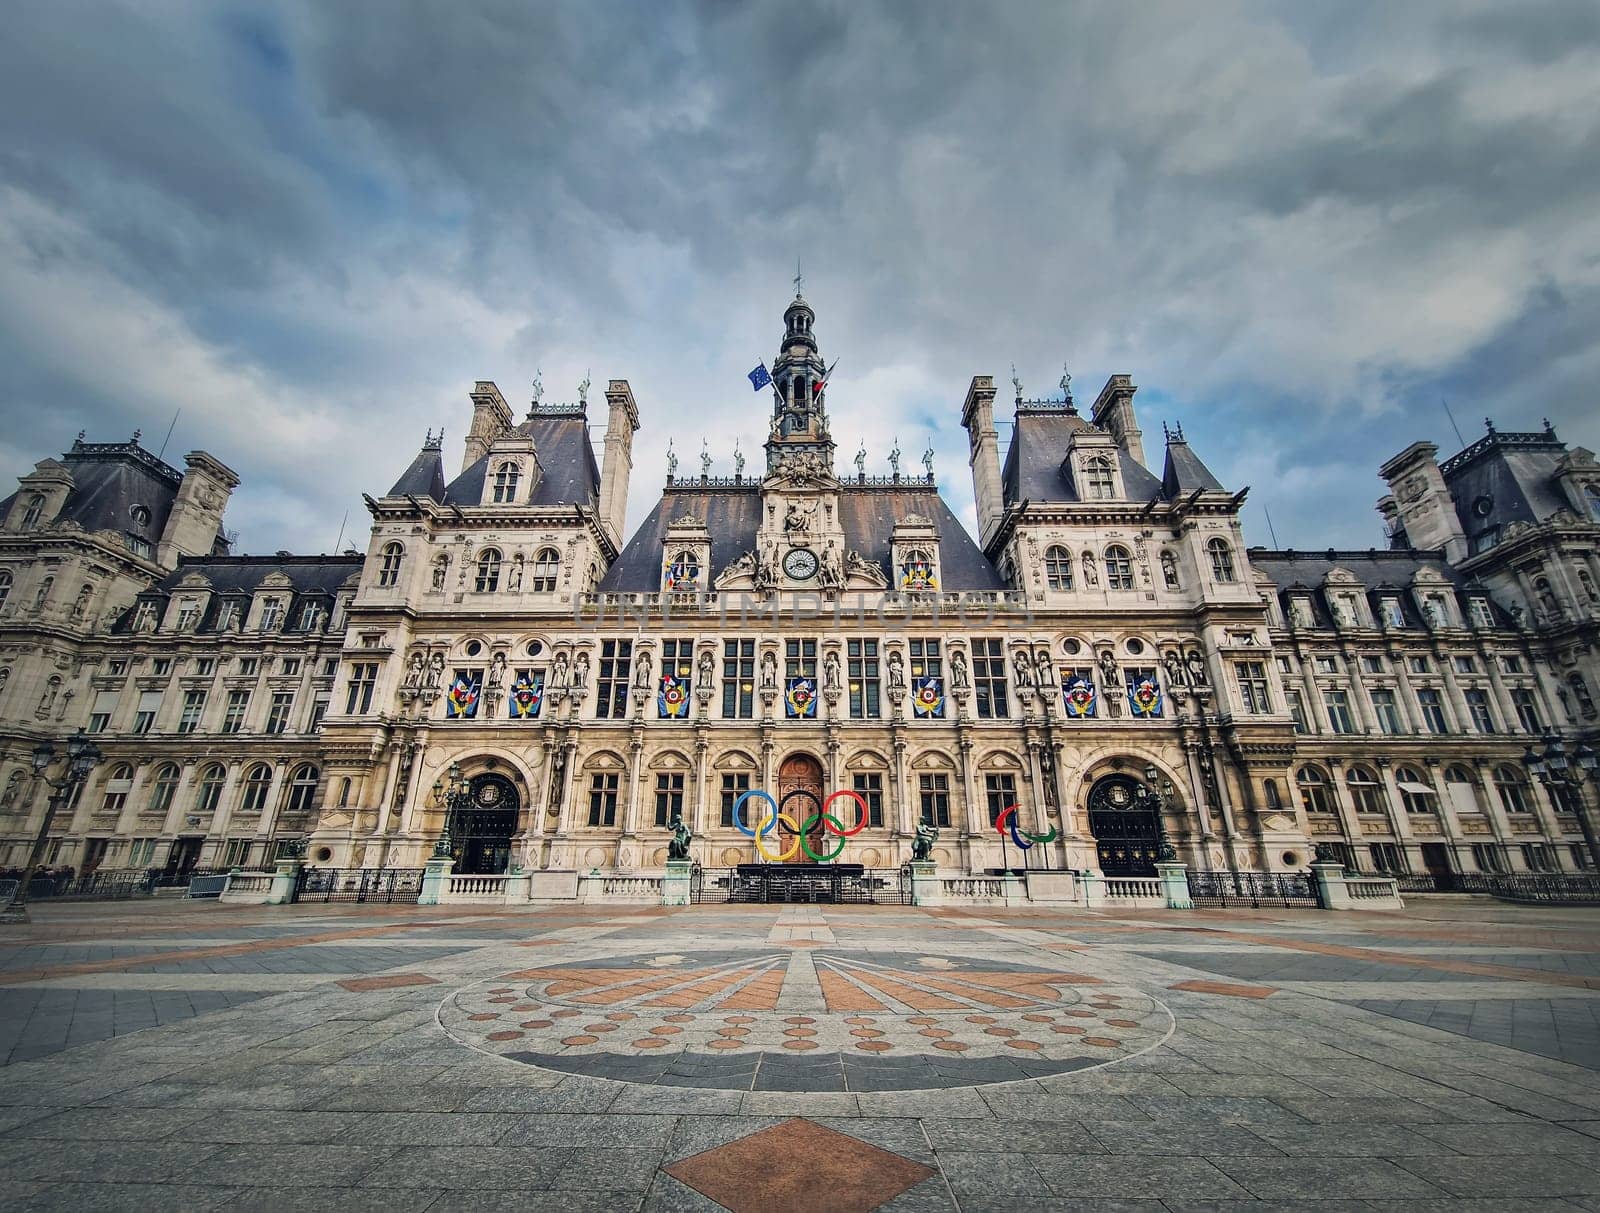 Paris City Hall, France. Outdoors view to the beautiful ornate facade of the historical building and the olympic games rings symbol in front of the central doors by psychoshadow